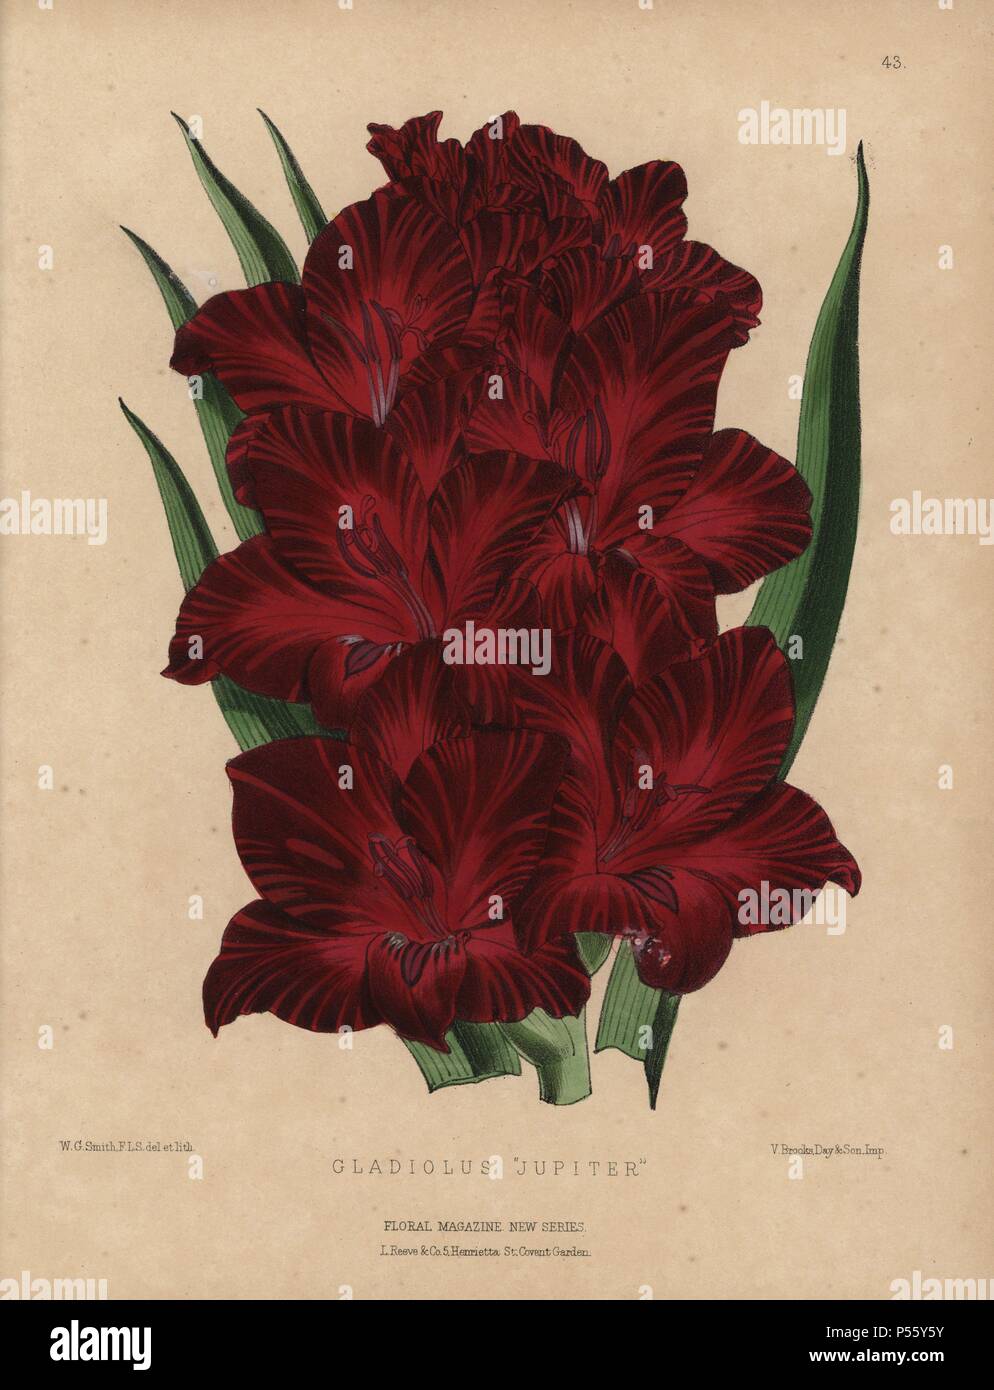 Crimson gladiolus. Gladiolus 'Jupiter'. Handcolored botanical drawn and lithographed by W.G. Smith from H.H. Dombrain's 'Floral Magazine' 1872.. Worthington G. Smith (1835-1917), architect, engraver and mycologist. Smith also illustrated 'The Gardener's Chronicle.' Henry Honywood Dombrain (1818-1905), clergyman gardener, was editor of the 'Floral Magazine' from 1862 to 1873. Stock Photo